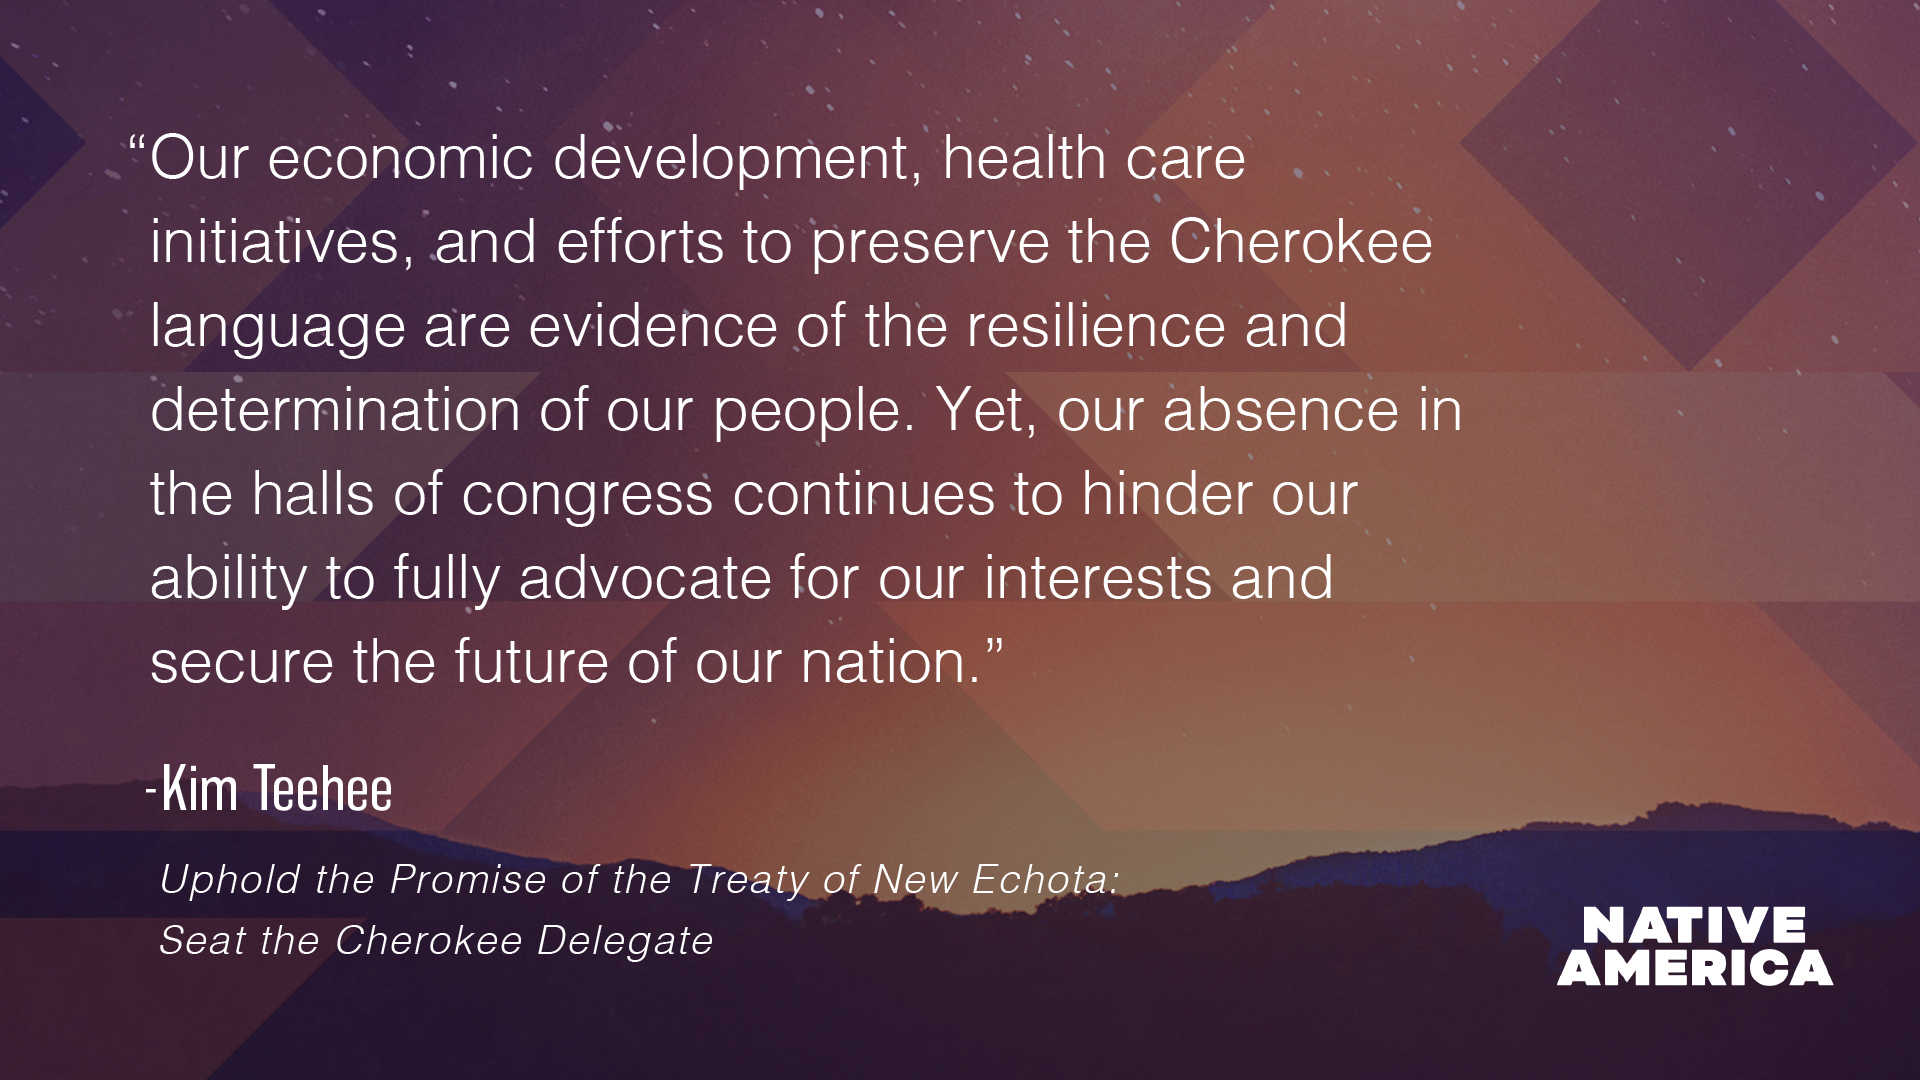 Uphold the Promise of the Treaty of New Echota: Seat the Cherokee Delegate